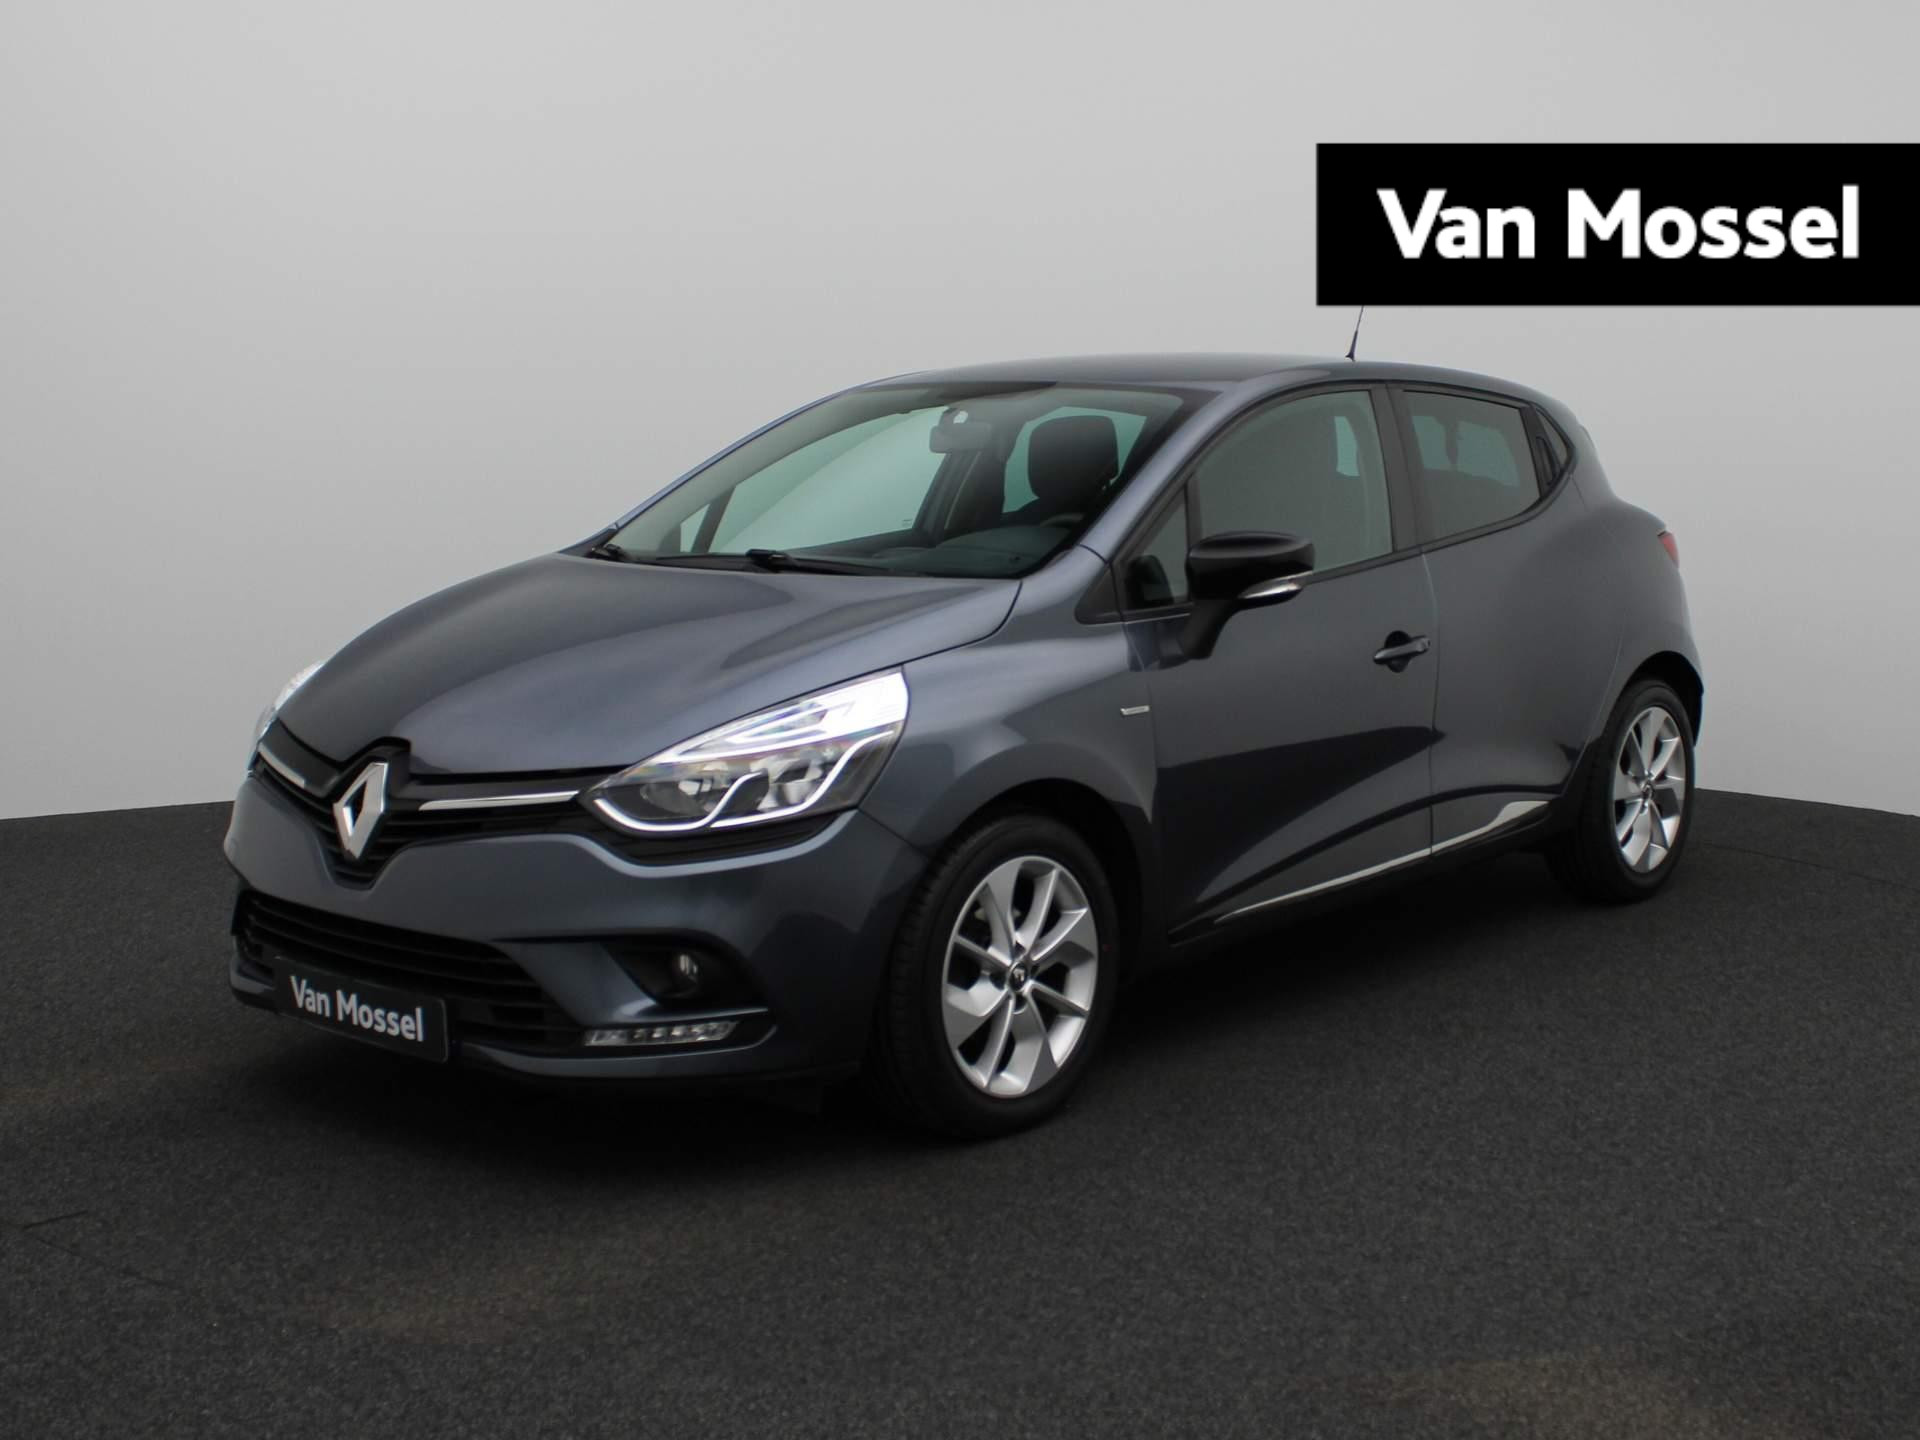 Renault Clio 0.9 TCe Limited Automaat | Navi | Airco | Cruise | Bluetooth | Keyless Go+Entry | 12 Maand BOVAG Garantie! |